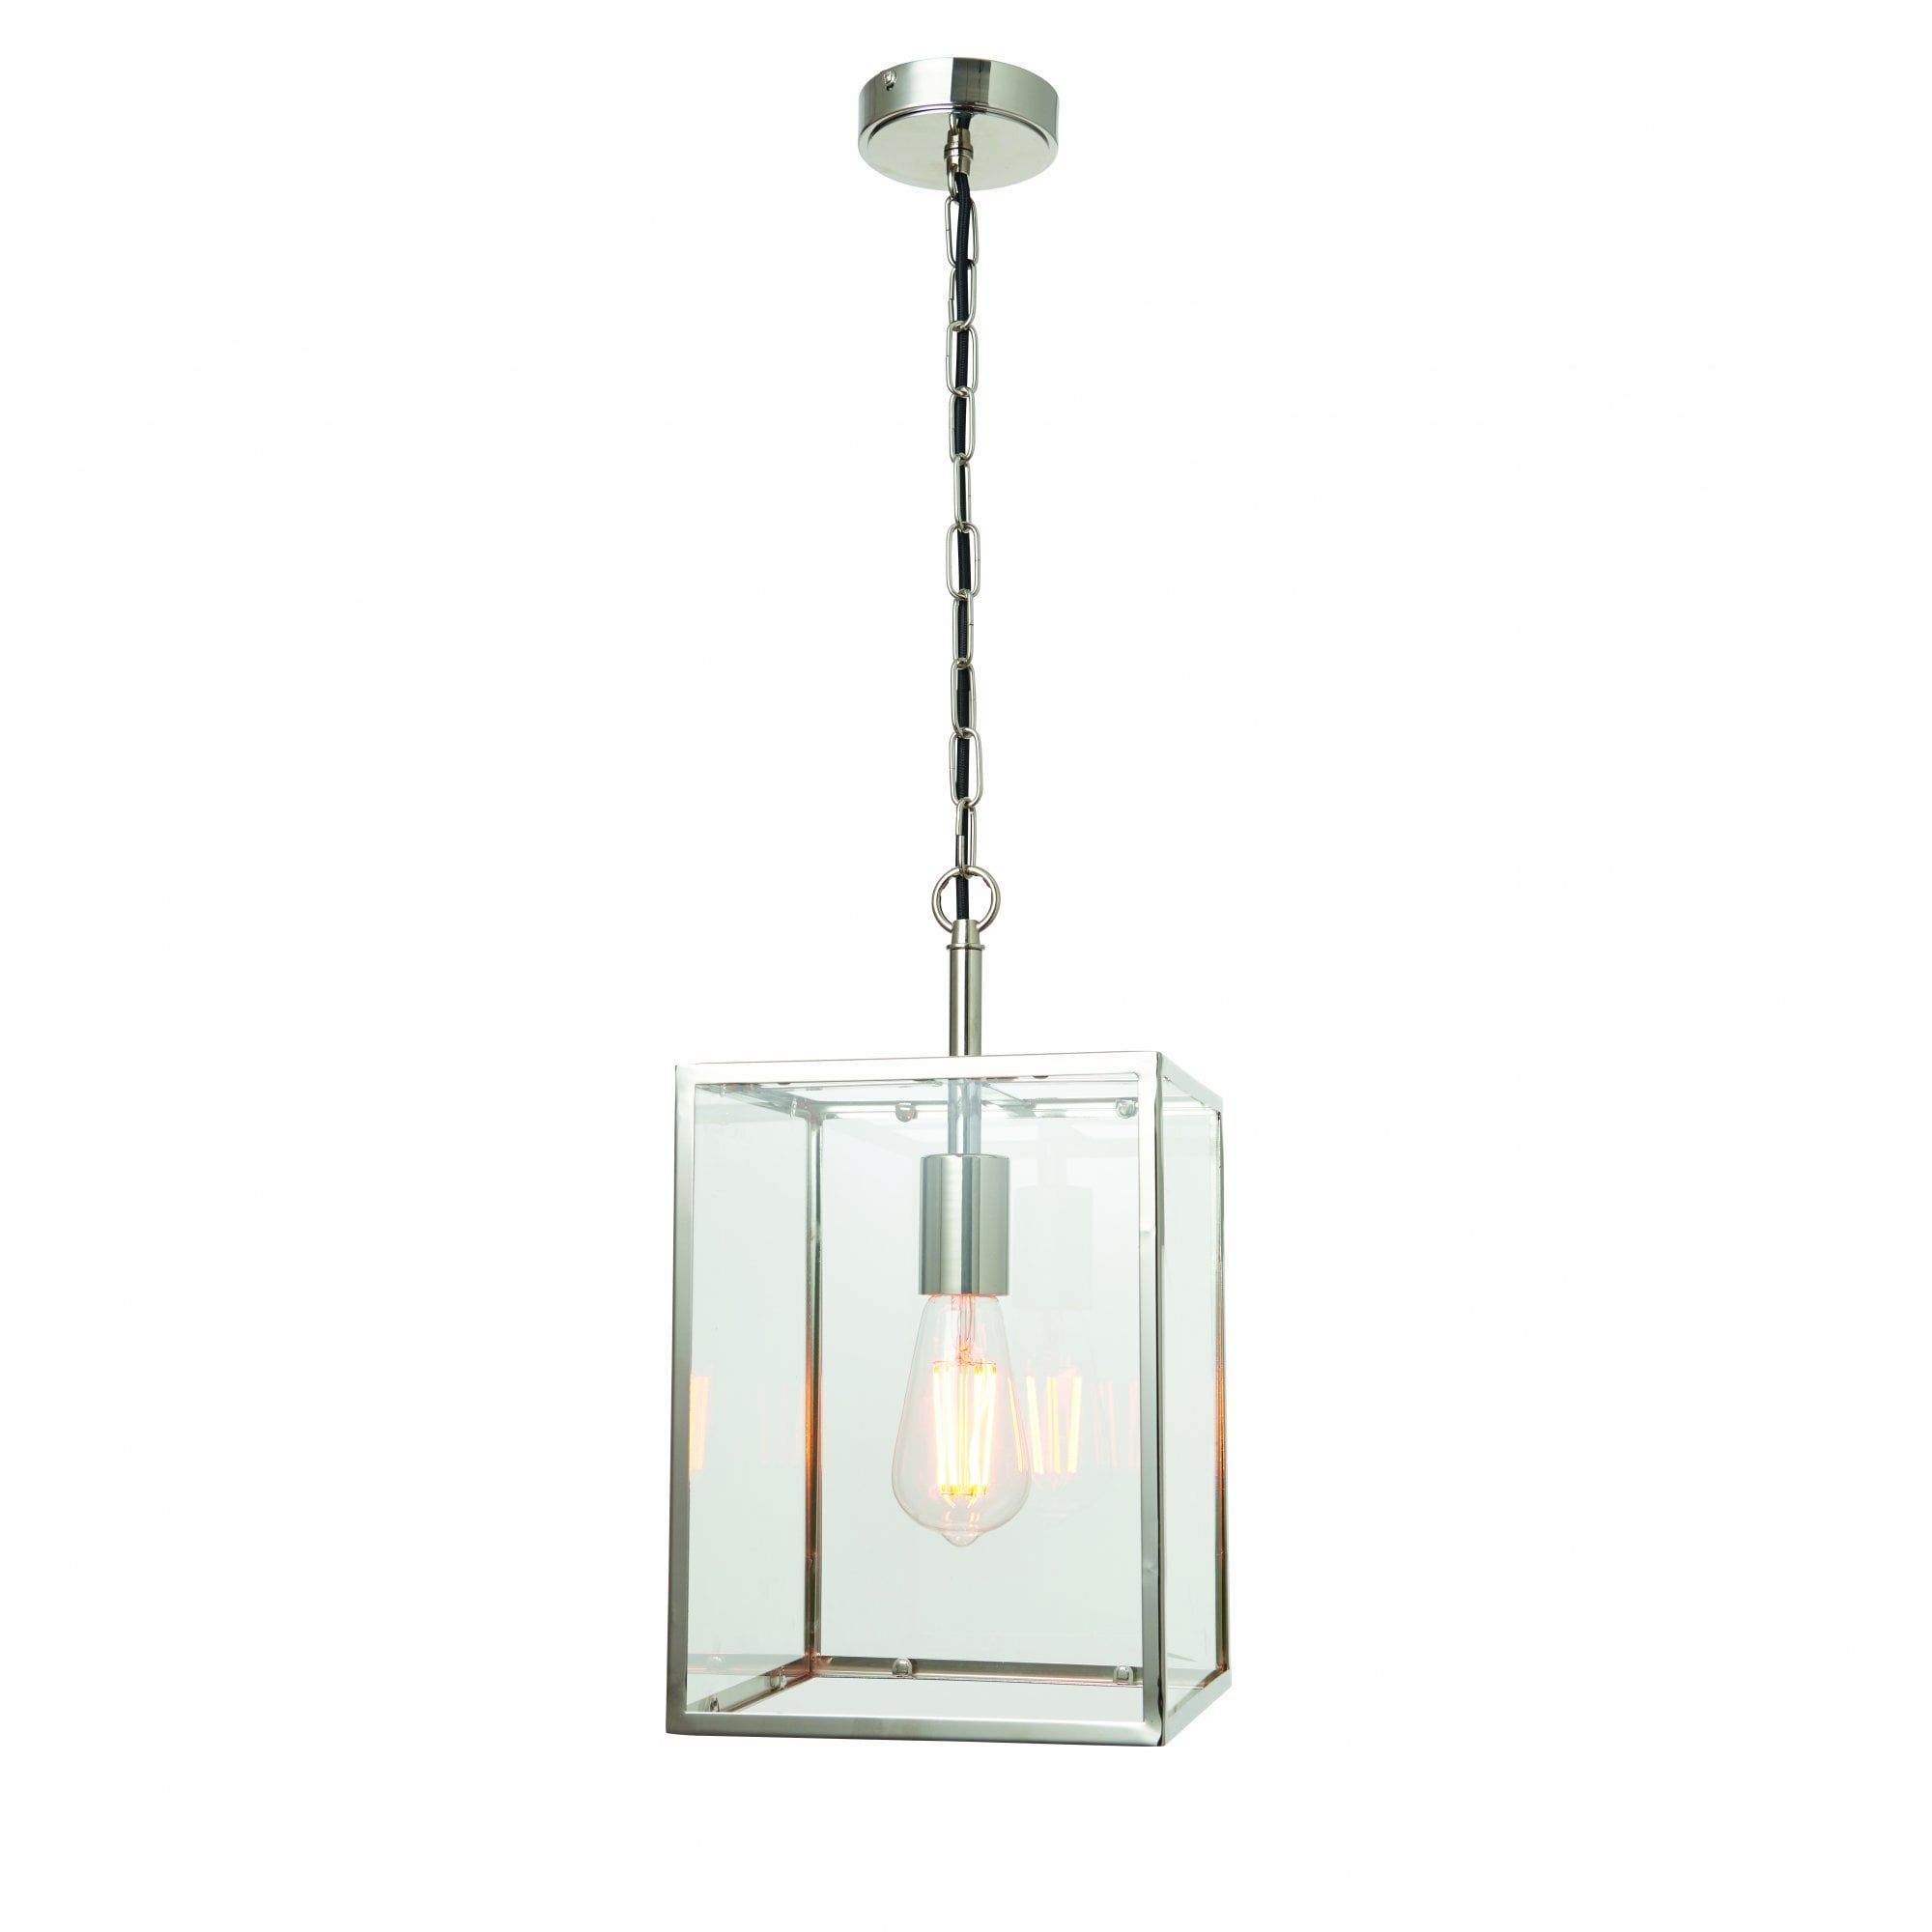 Pendant 40w Bright Nickel Plate & Clear Glass Pertaining To Popular Lantern Chandeliers With Clear Glass (View 1 of 10)